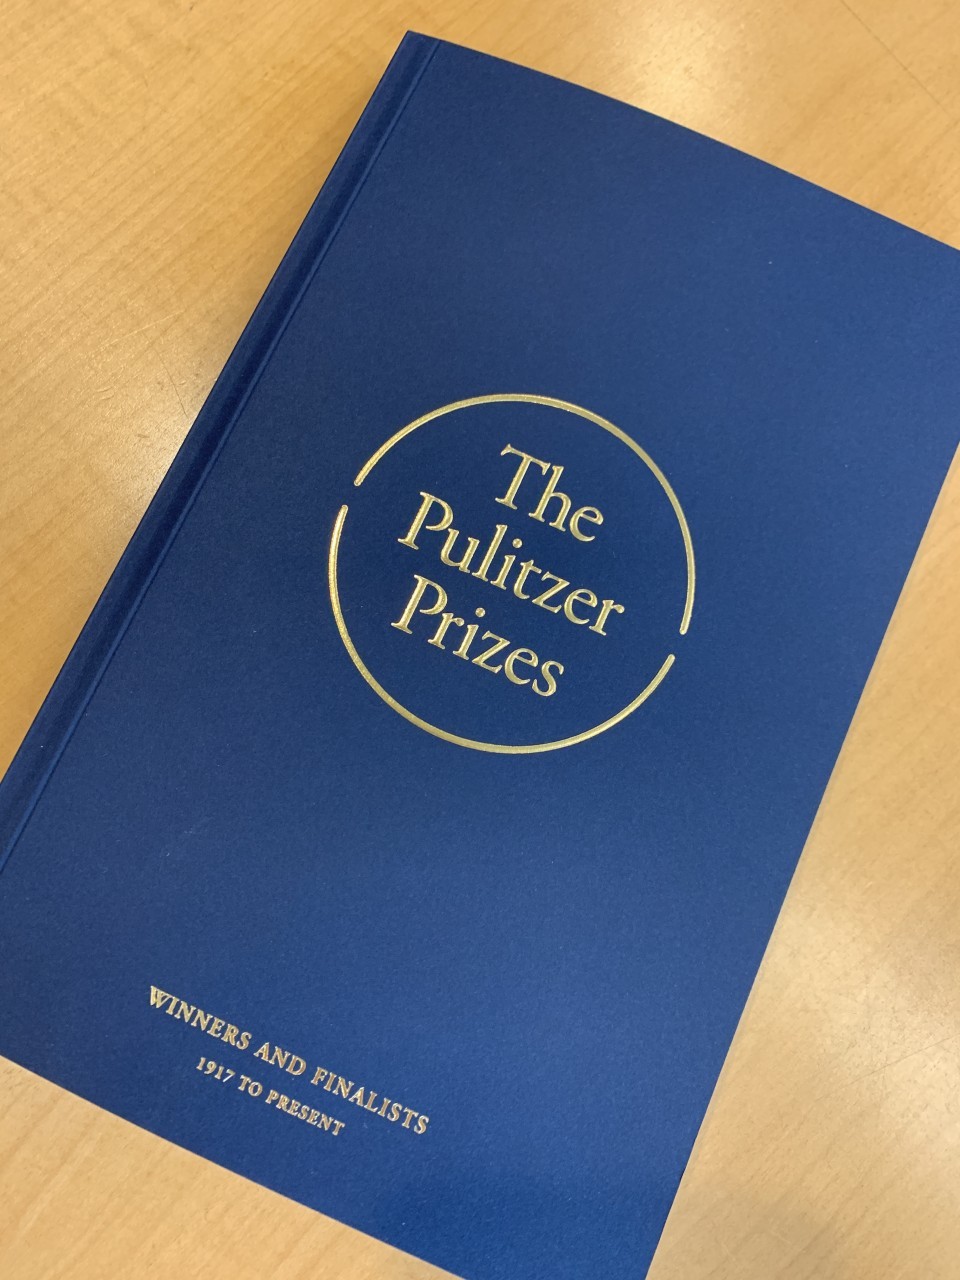 Downloadable Ebook of Pulitzer Winners and Finalists Available for the